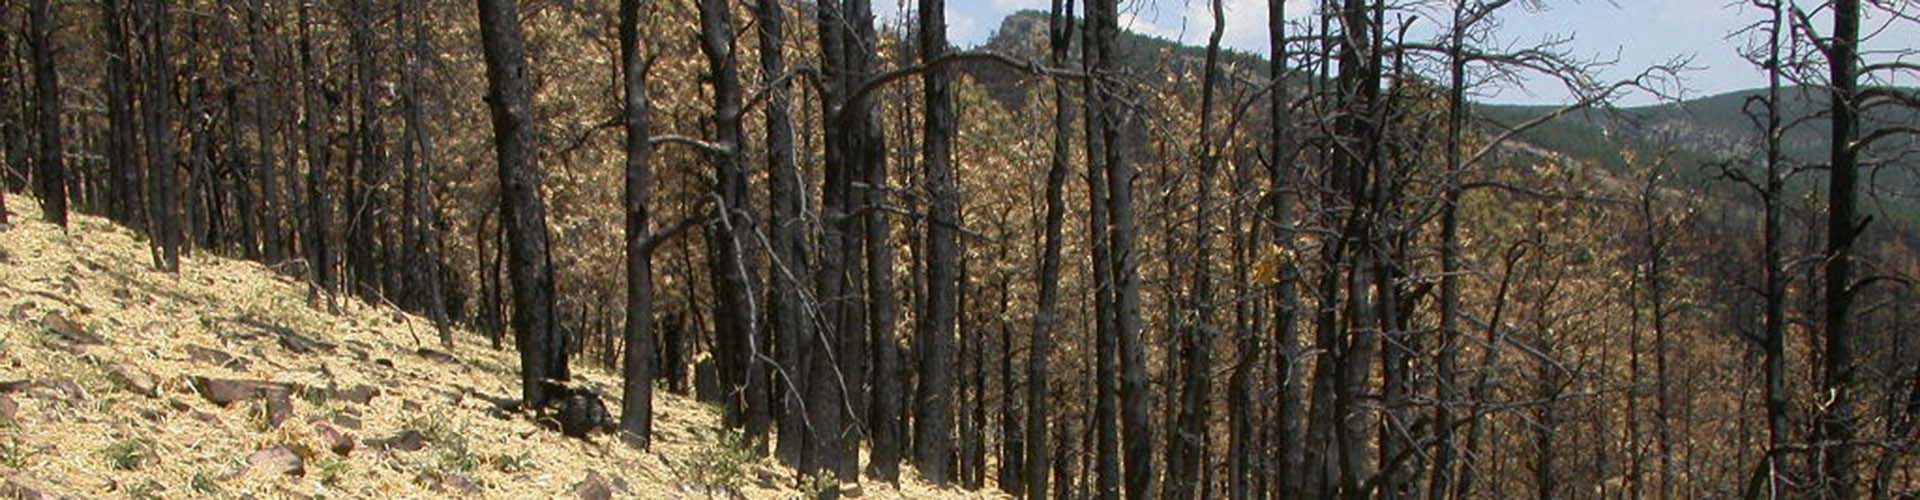 Stand of burned trees on steep slope